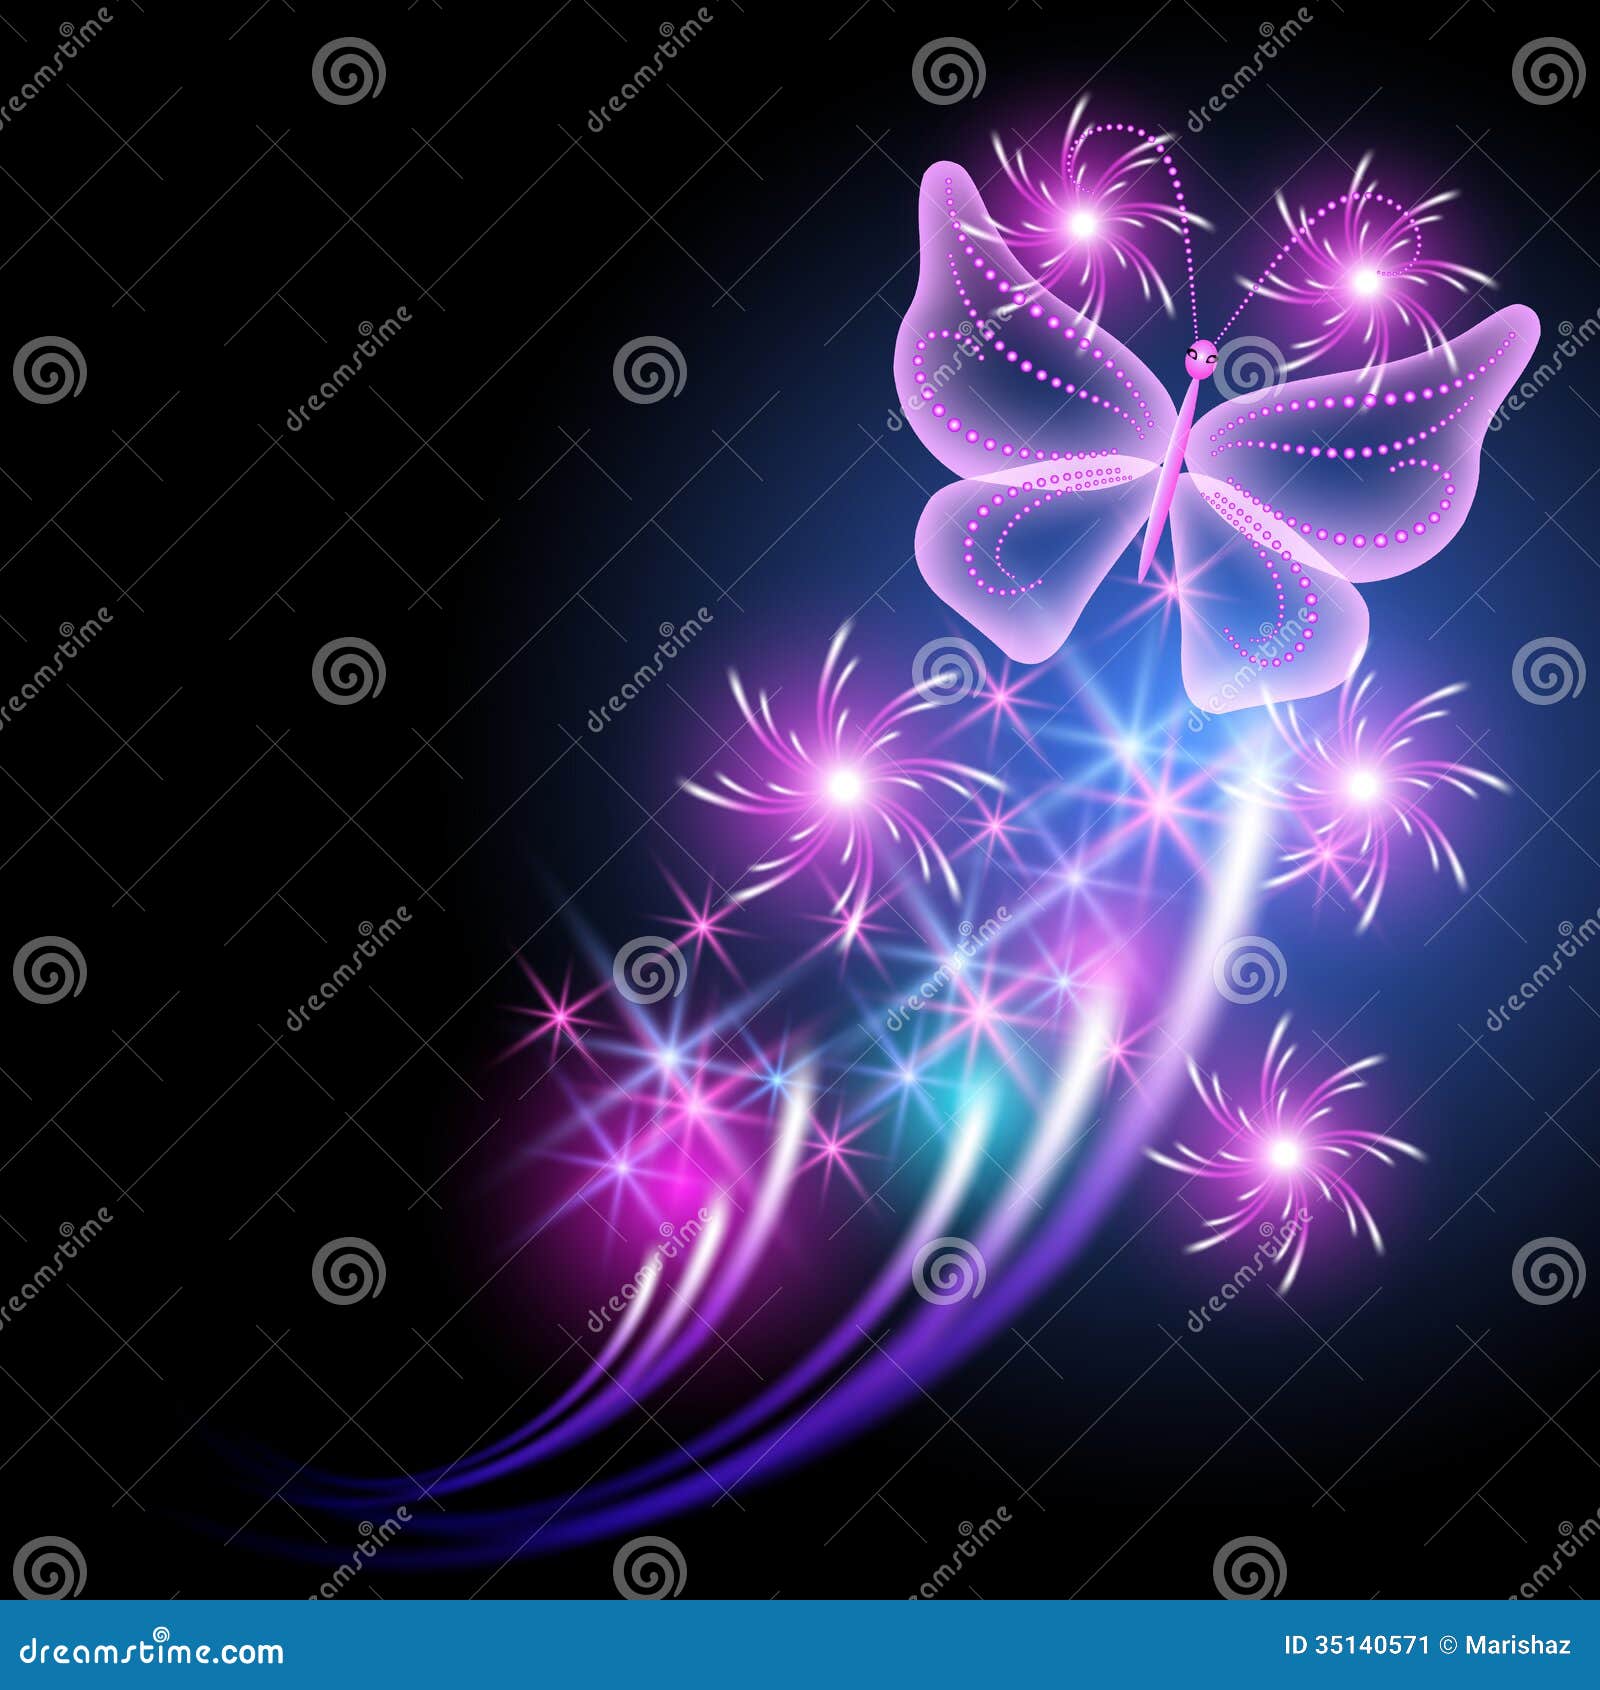 Butterfly And Stars Stock Image - Image: 35140571